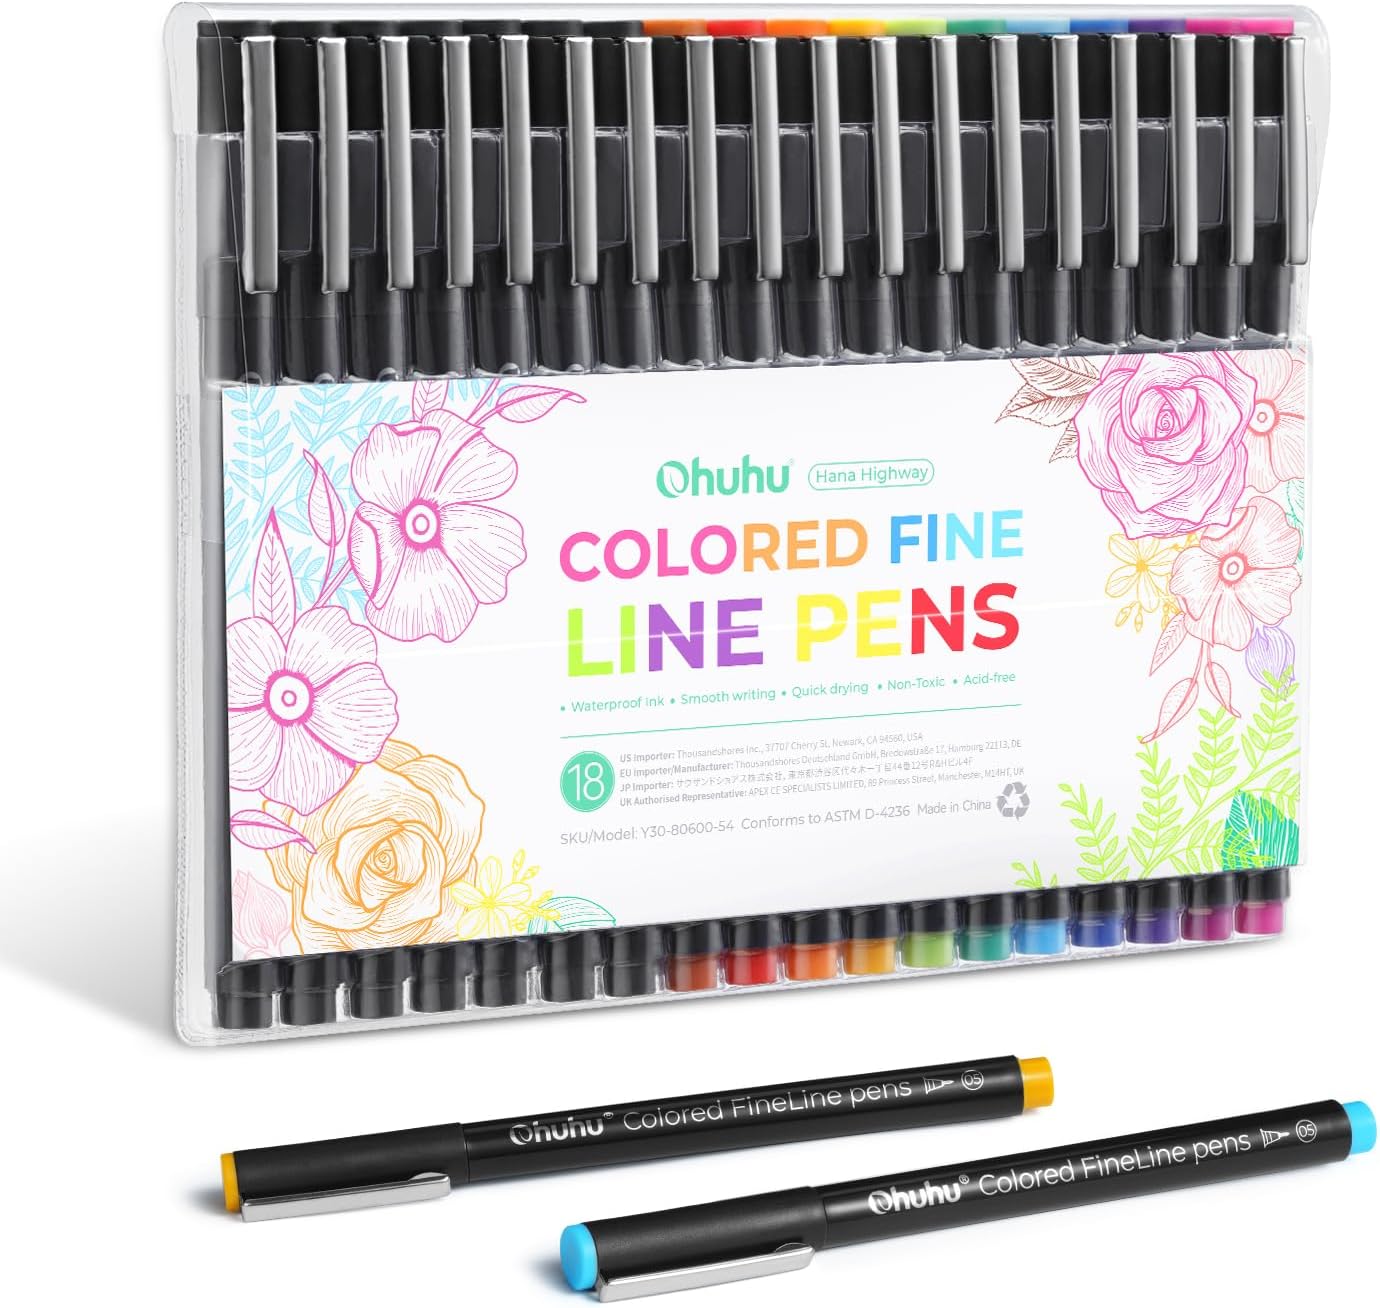 Ohuhu Colored Fineliner Drawing Pens: 18 Packs Fineliner Pens 11 Colored Pens &#x26; 7 Assorted Point Sizes Black Micro Pens Waterproof for Drawing Sketching Anime Manga Artists Beginners - Hana Highway